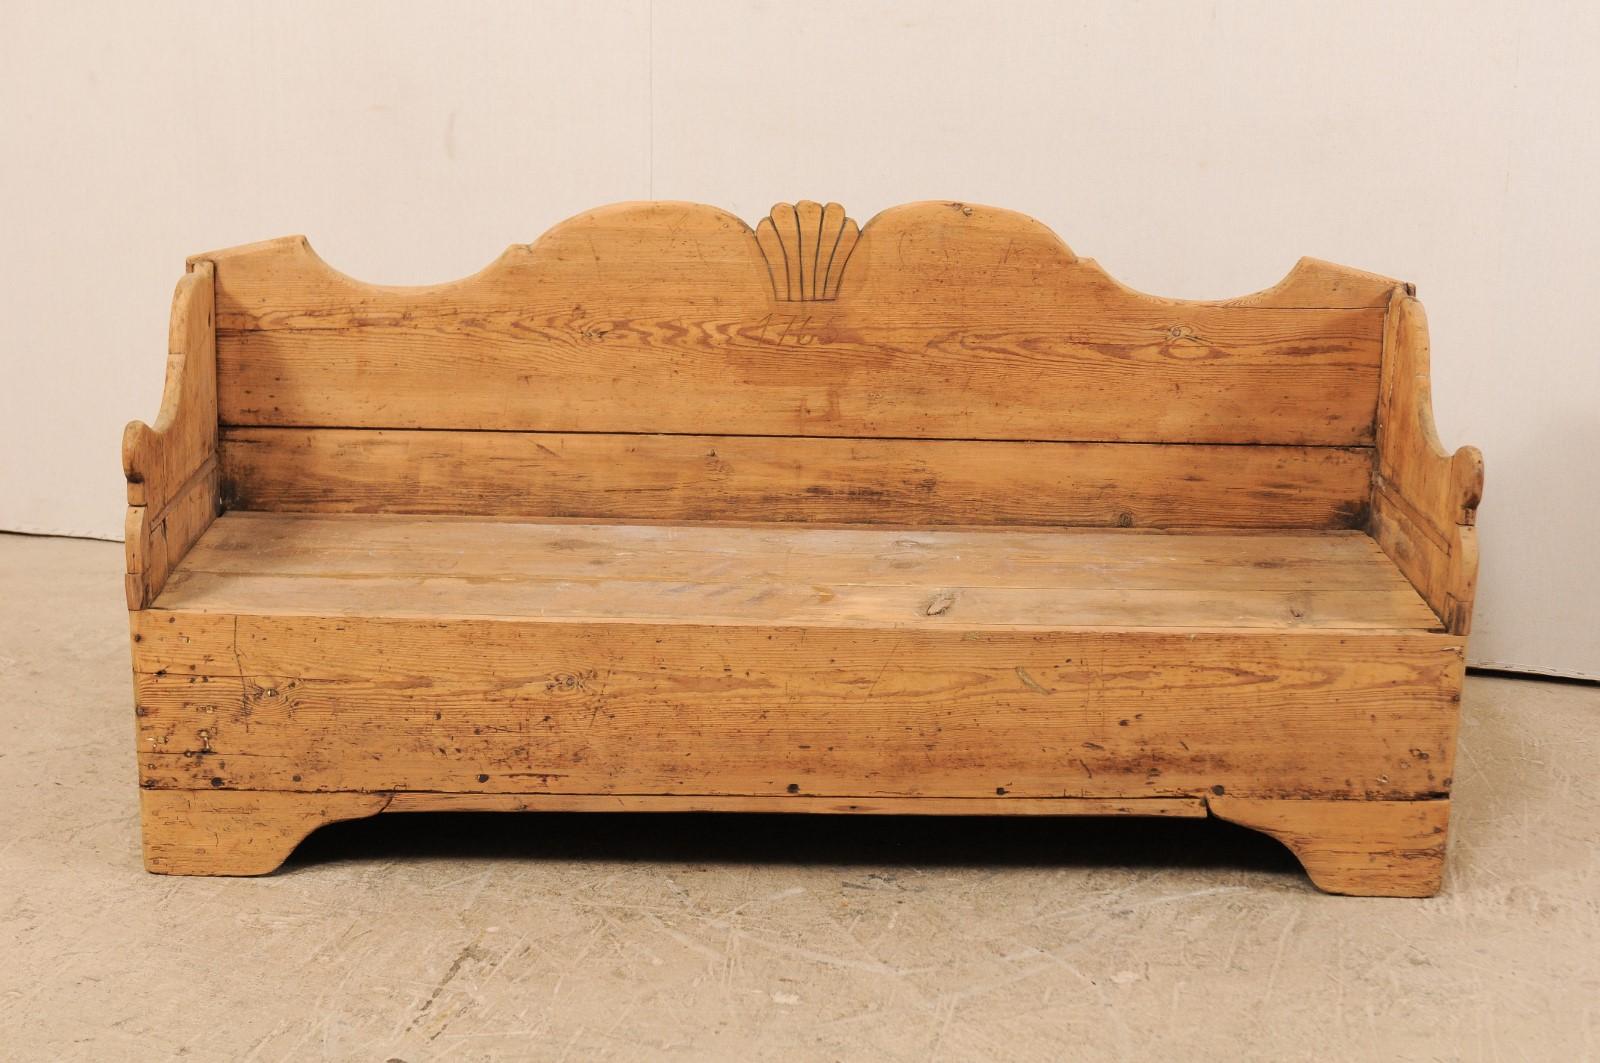 A Swedish period Gustavian wood sofa bench from the early 19th century. This antique wood bench from Sweden features a high back with nicely scalloped back rail with shell carved at centre, high and curvy side arms, a thick skirt, and is raised upon